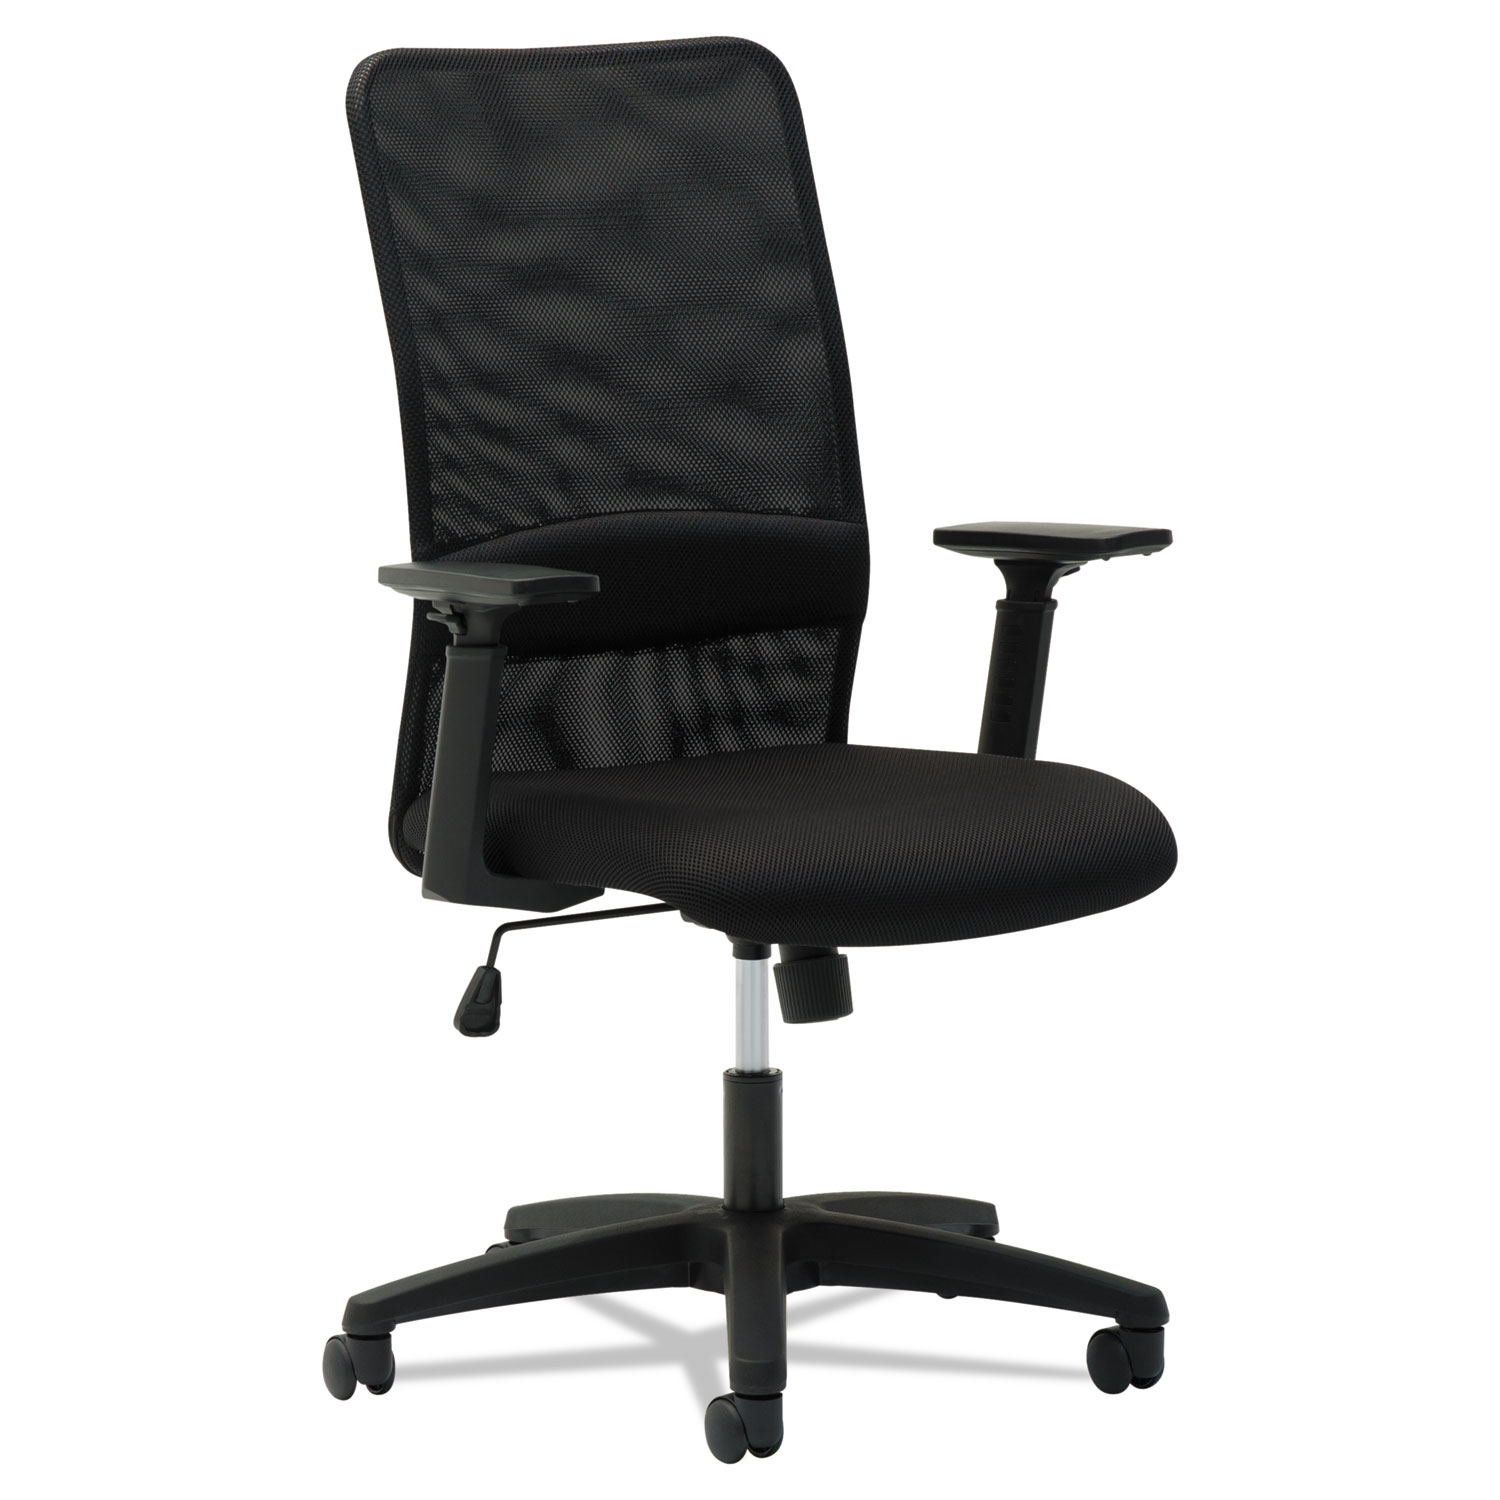  OIF OIFSM4117 Mesh High-Back Chair, Supports up to 225 lbs., Black Seat/Black Back, Black Base (OIFSM4117) 